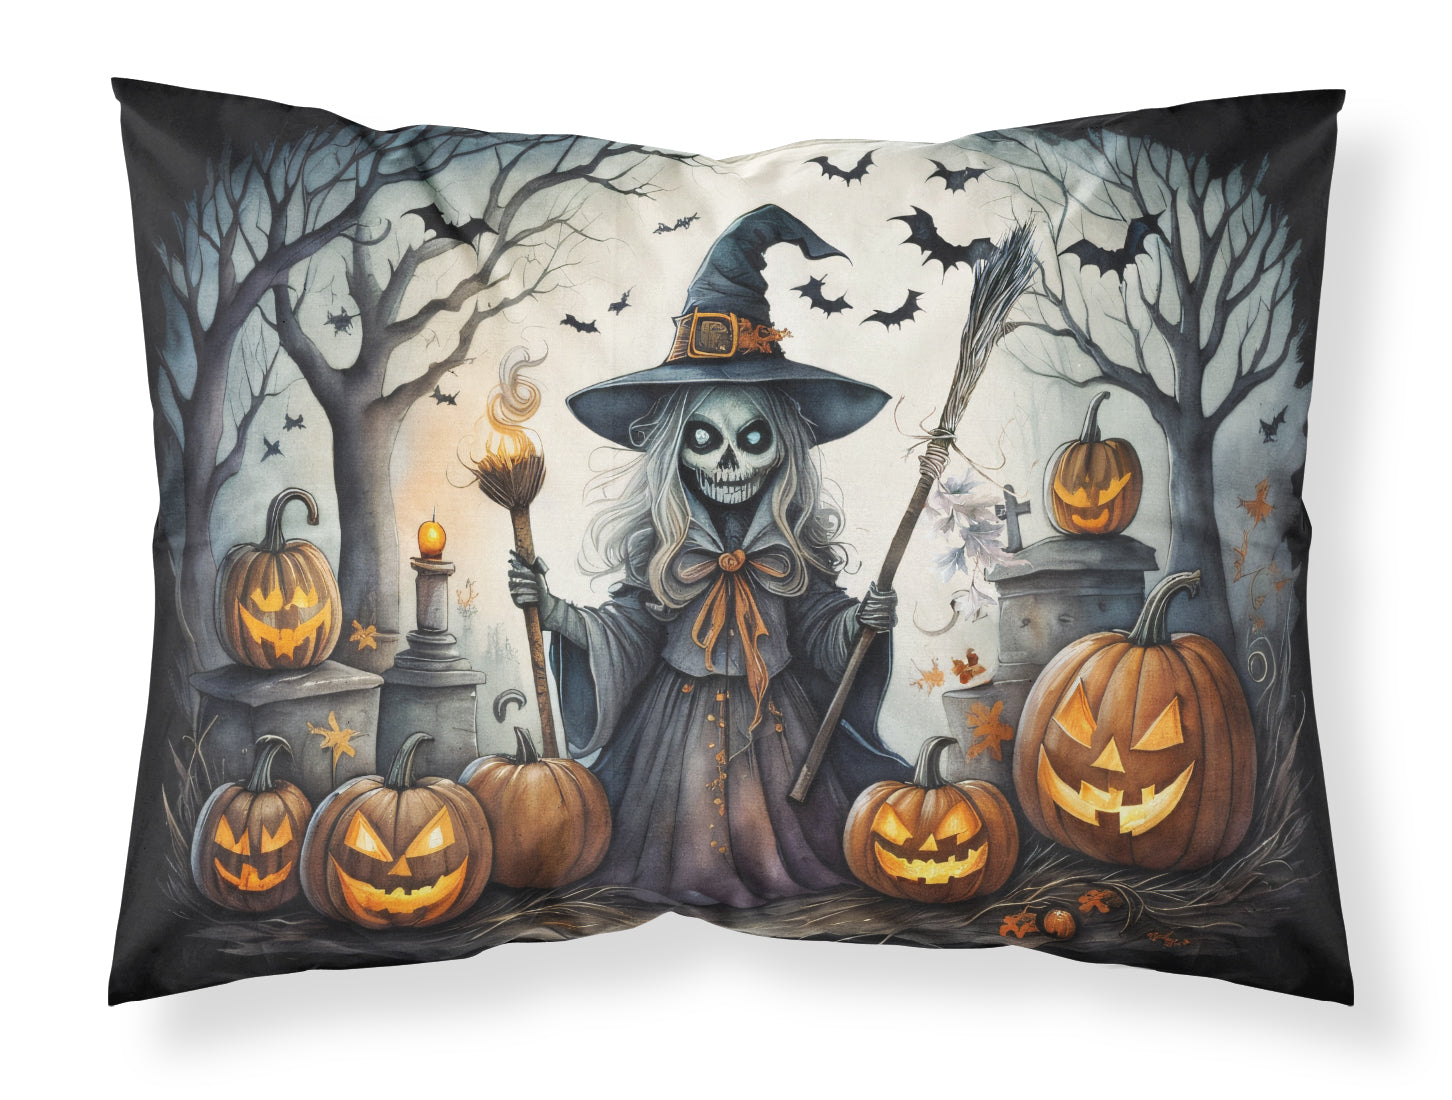 Buy this Witch Spooky Halloween Fabric Standard Pillowcase